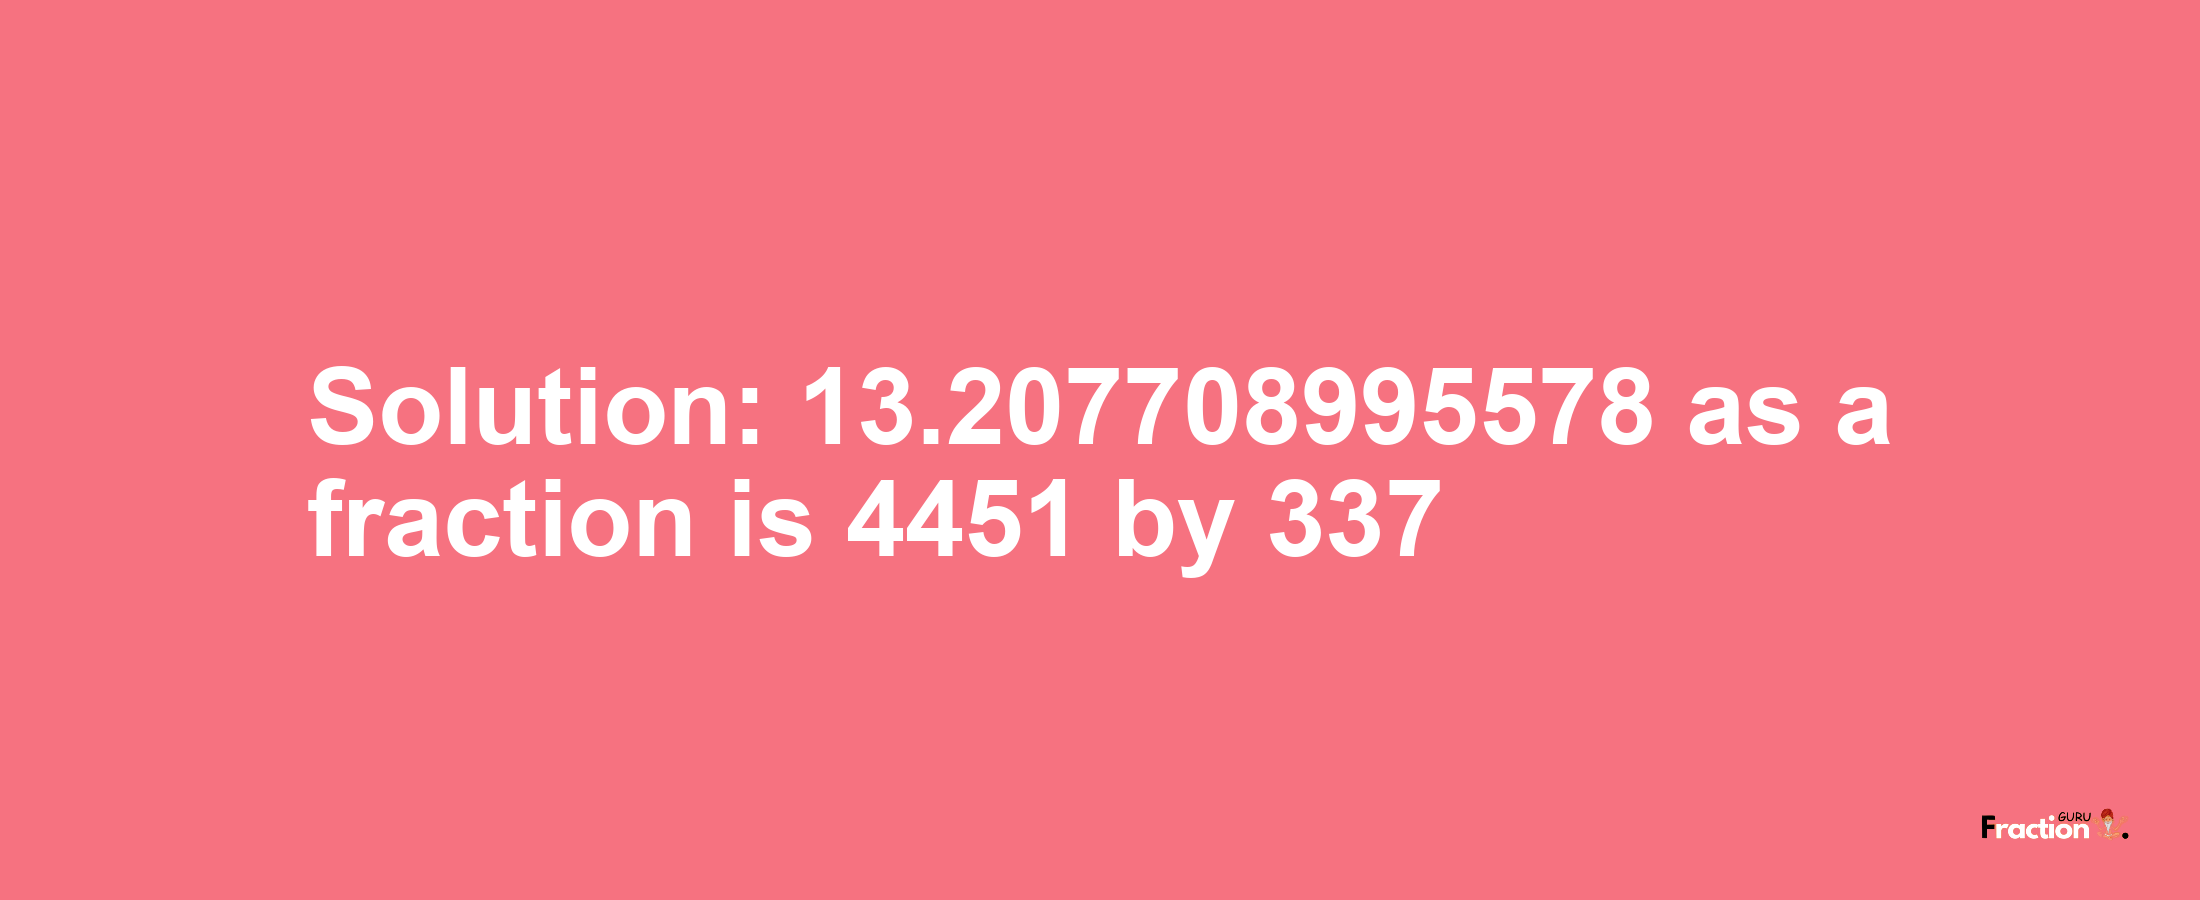 Solution:13.207708995578 as a fraction is 4451/337